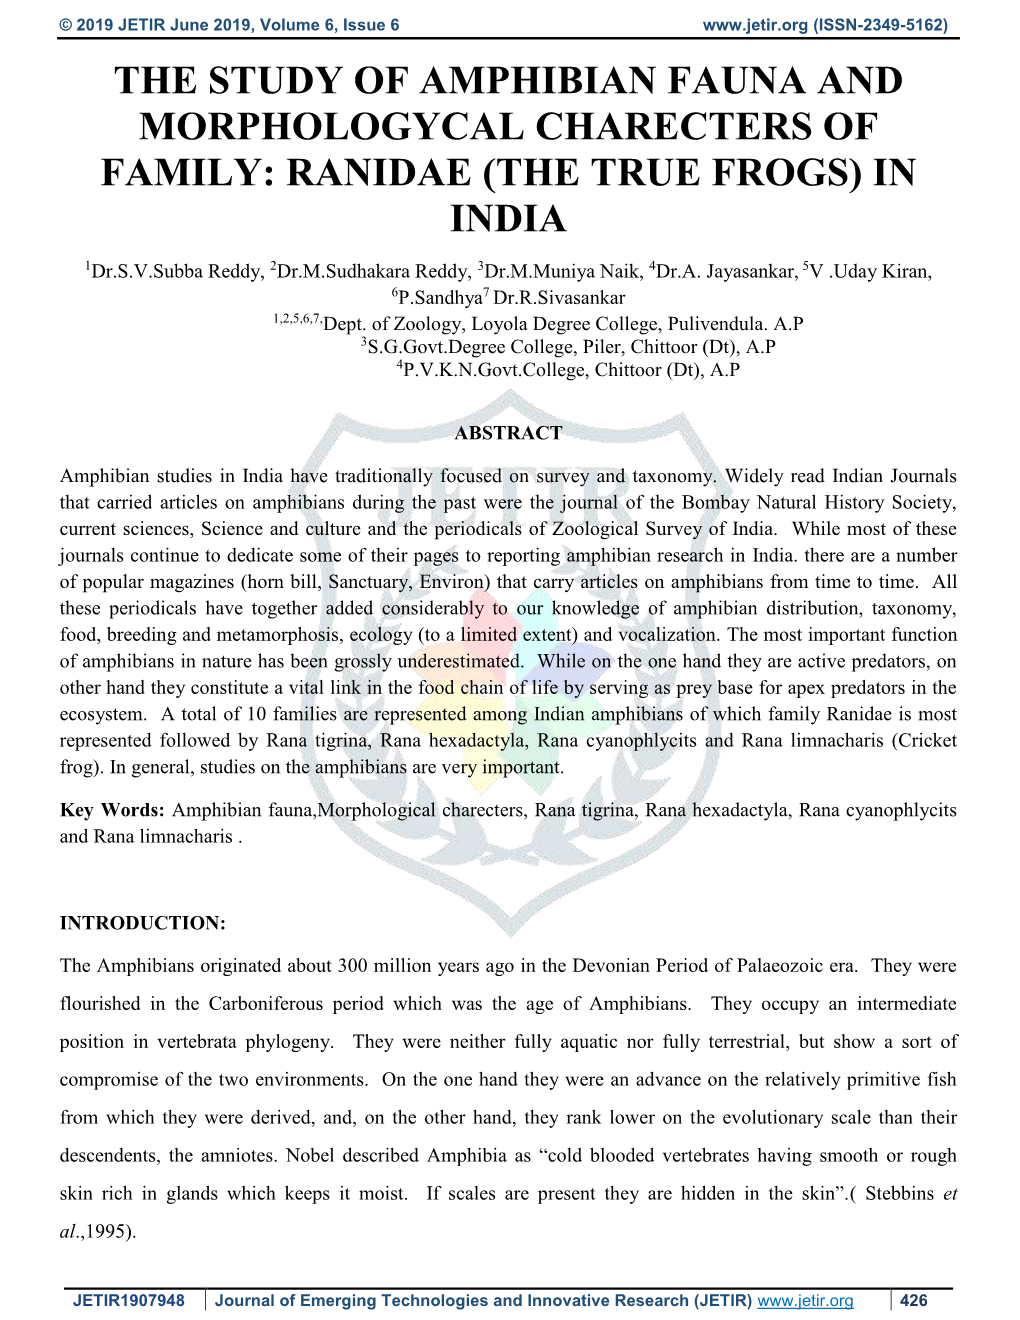 The Study of Amphibian Fauna and Morphologycal Charecters of Family: Ranidae (The True Frogs) in India